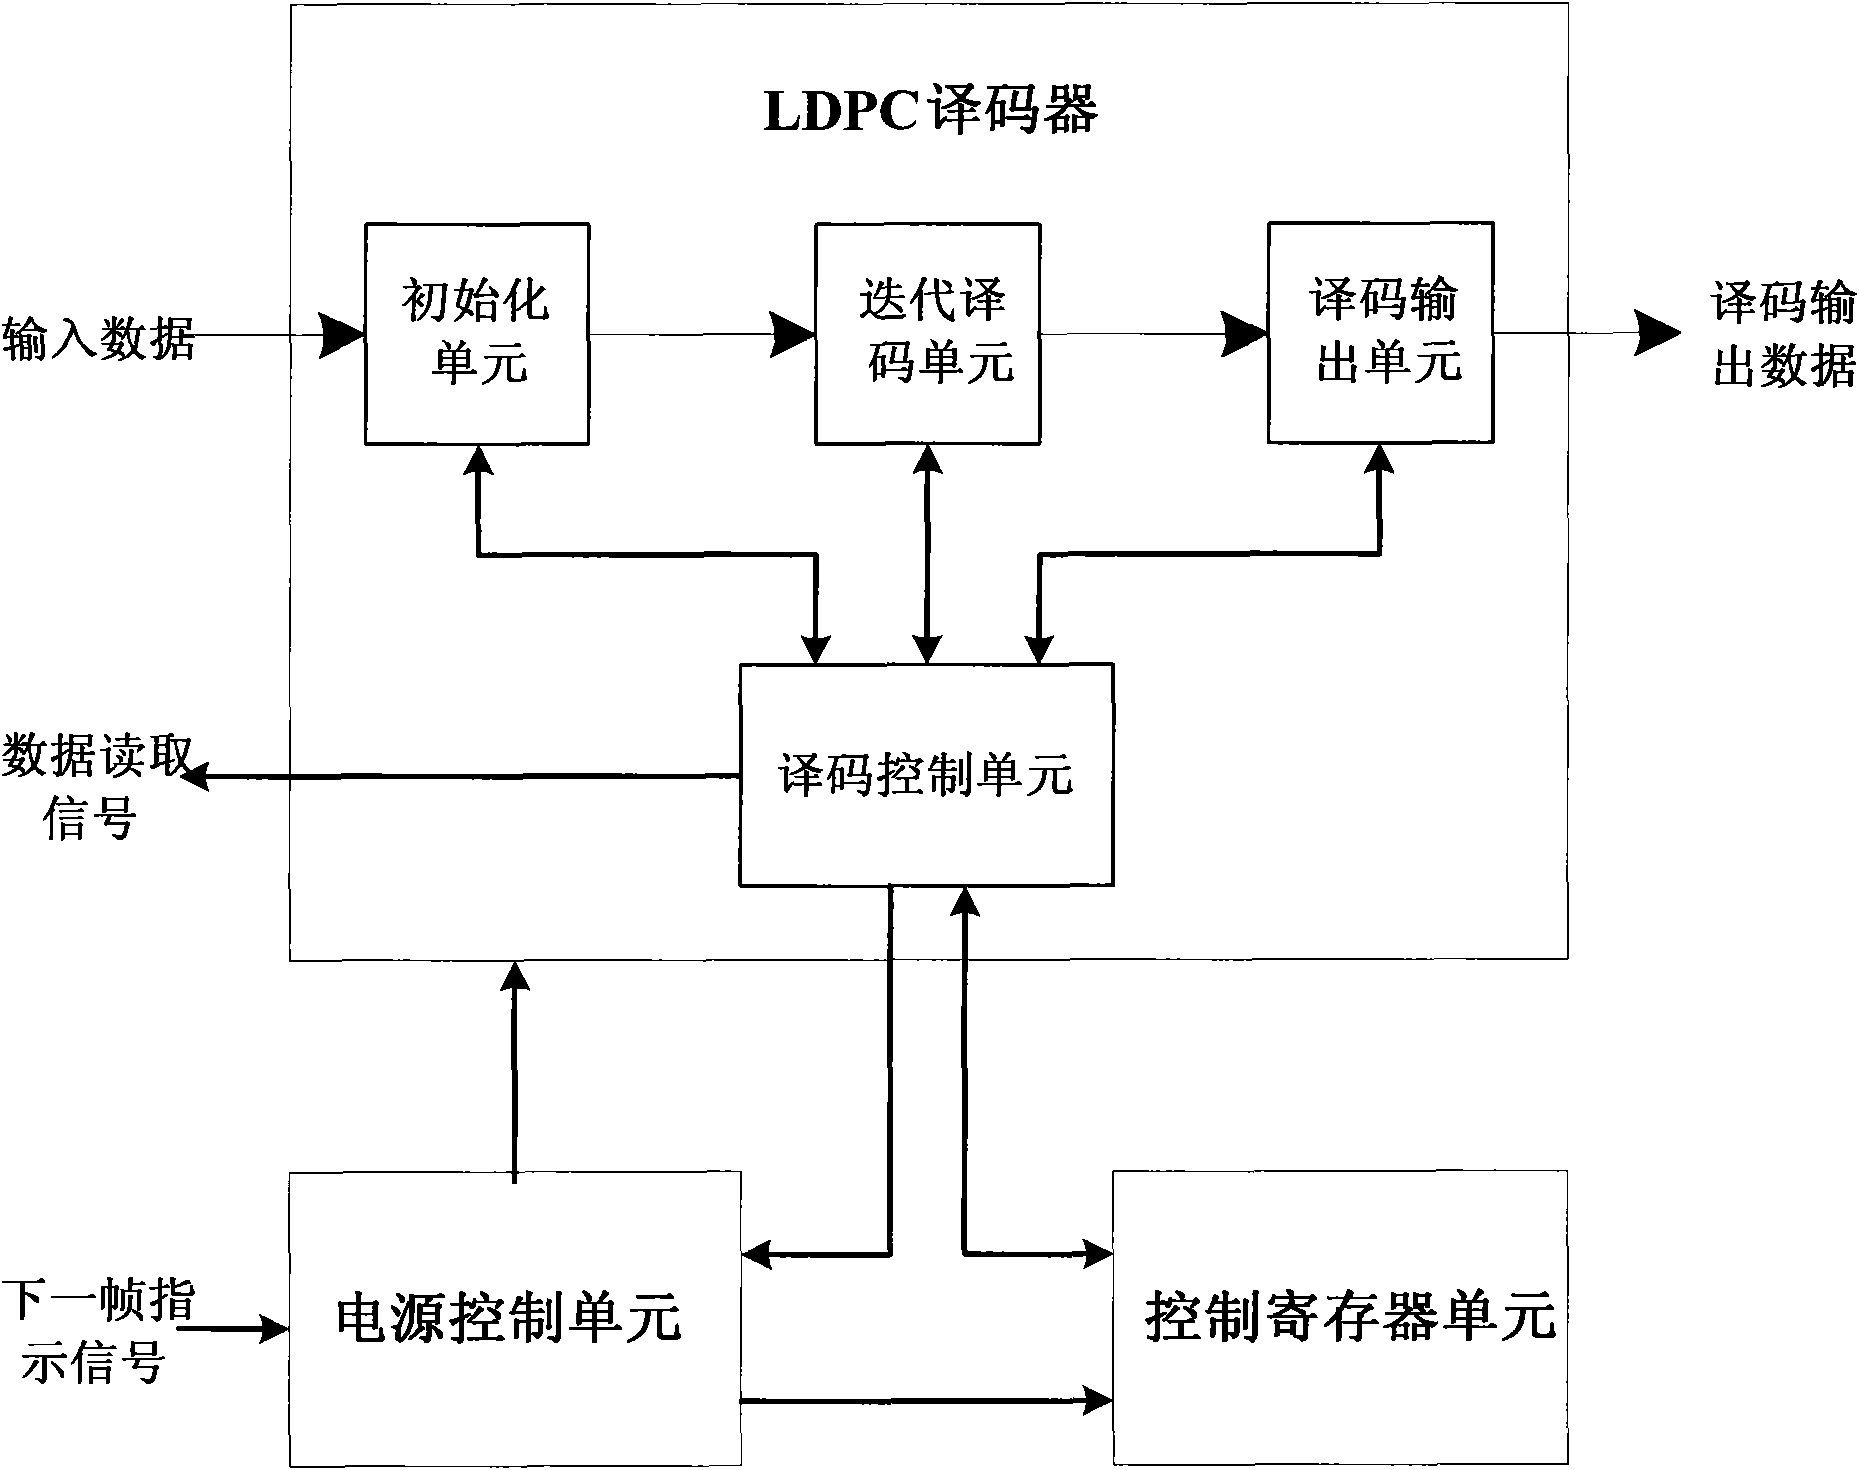 Low-power-consumption low density parity check code (LDPC) decoding device in China mobile multimedia broadcasting (CMMB) receiving machine and implementation method thereof